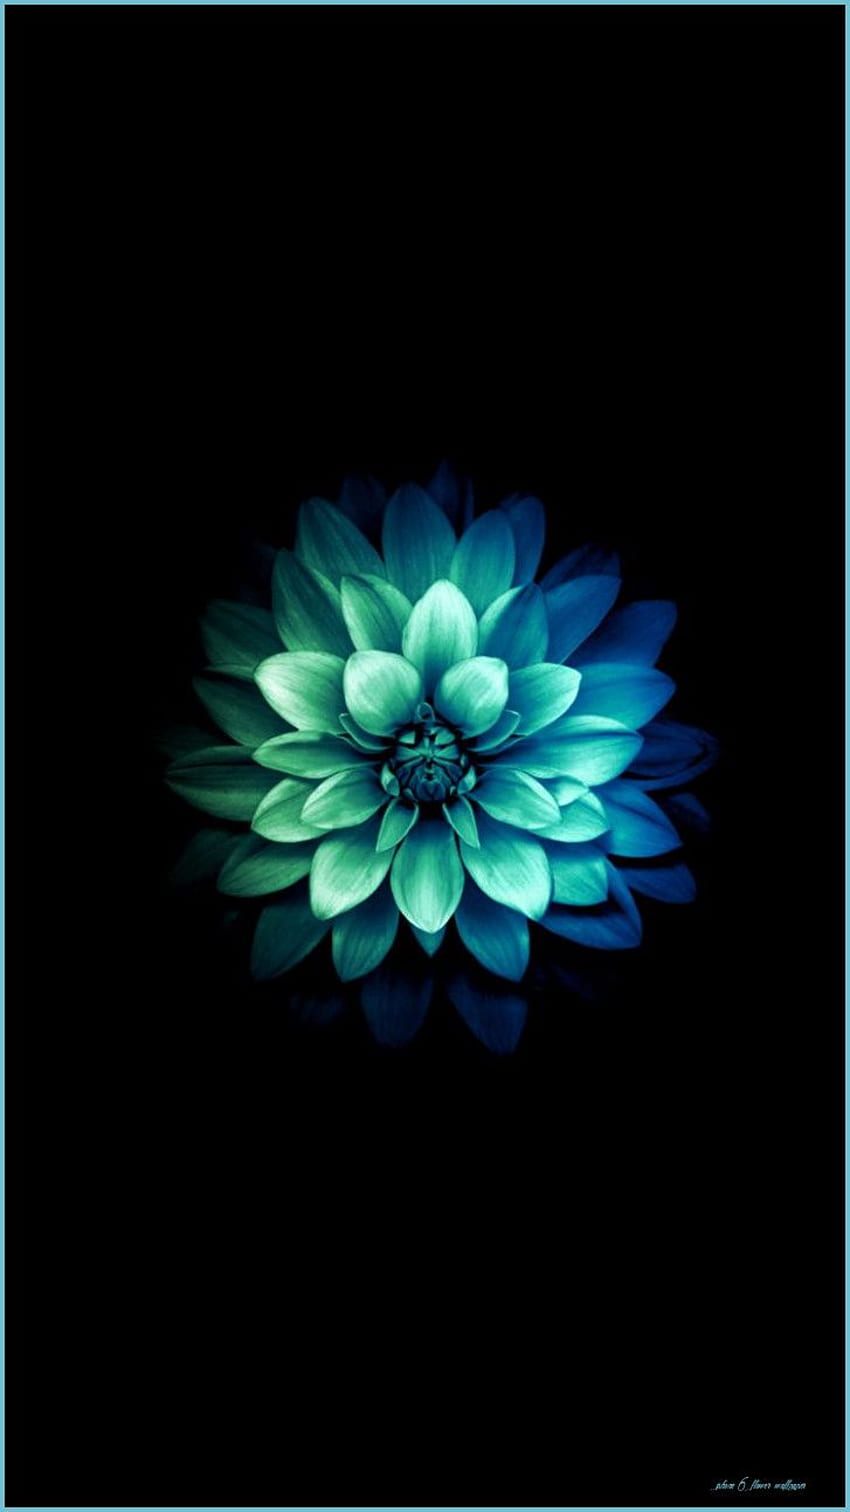 For IPhone 9S Blue Flower re Flower iPhone - iPhone 6 フラワー, 美的フラワー HD電話の壁紙